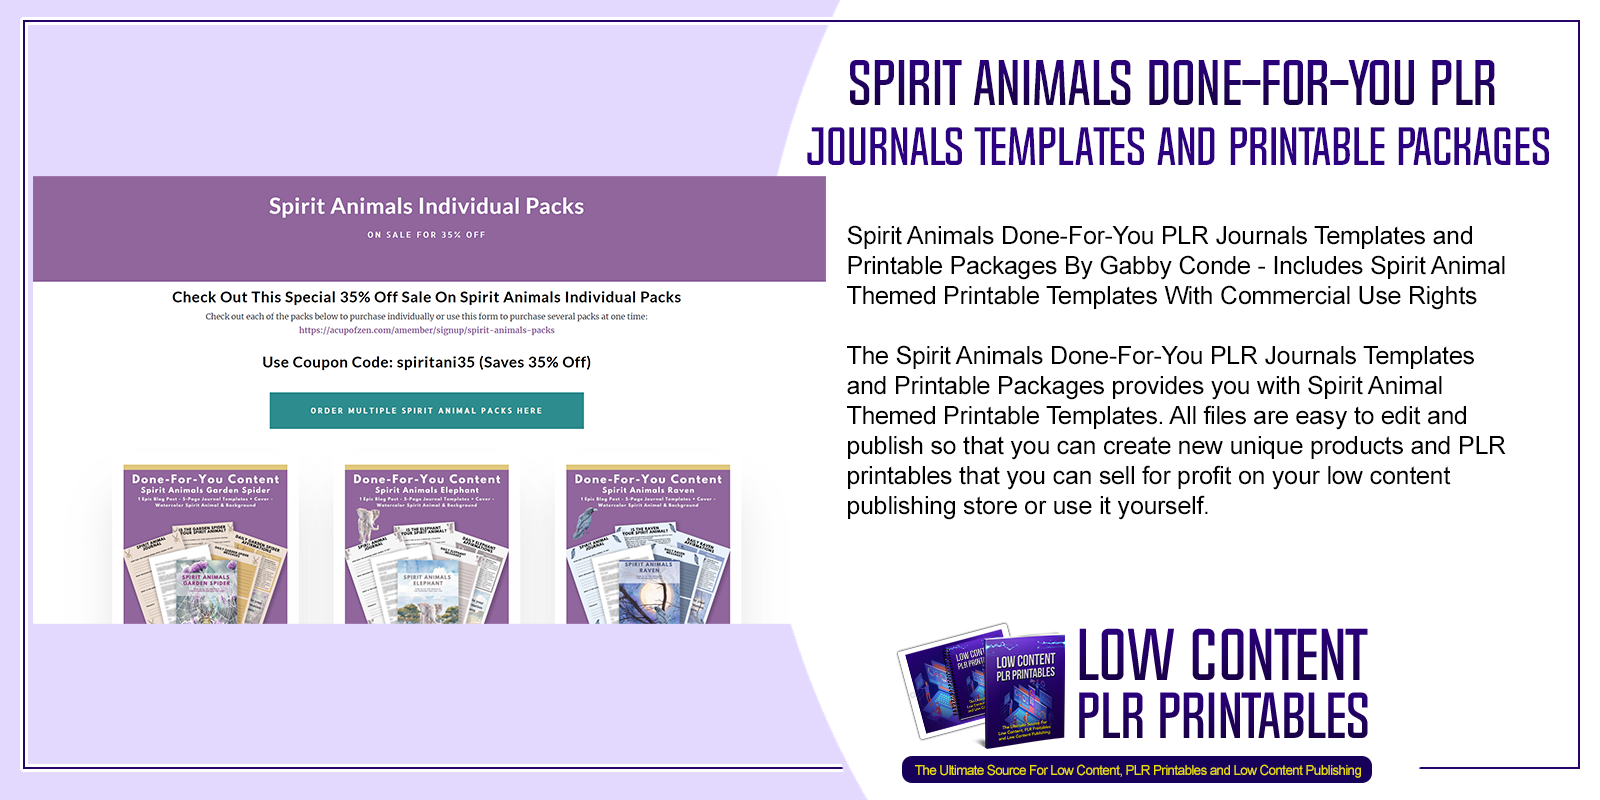 Spirit Animals Done-For-You PLR Journals Templates and Printable Packages